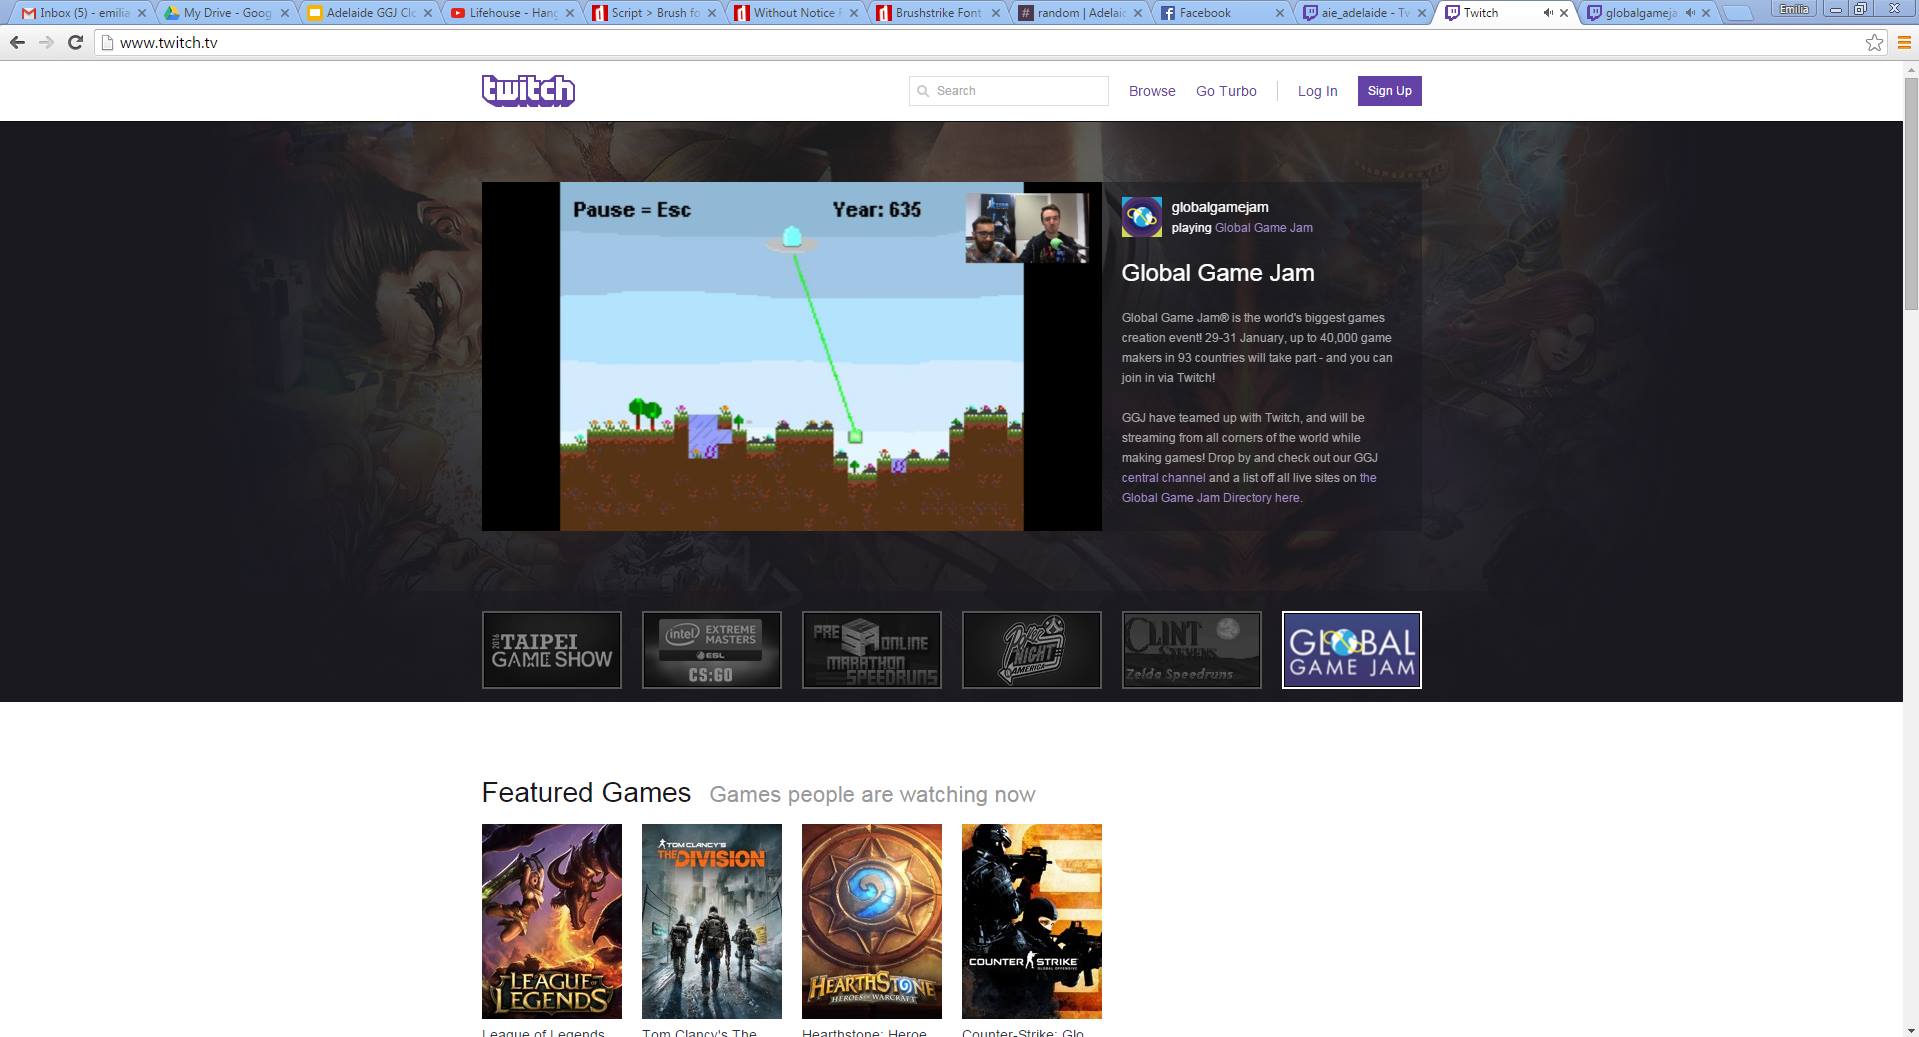 Partick Sigley's Alien Evolution GGJ15 Title Featured on Twitch Front Page.jpg